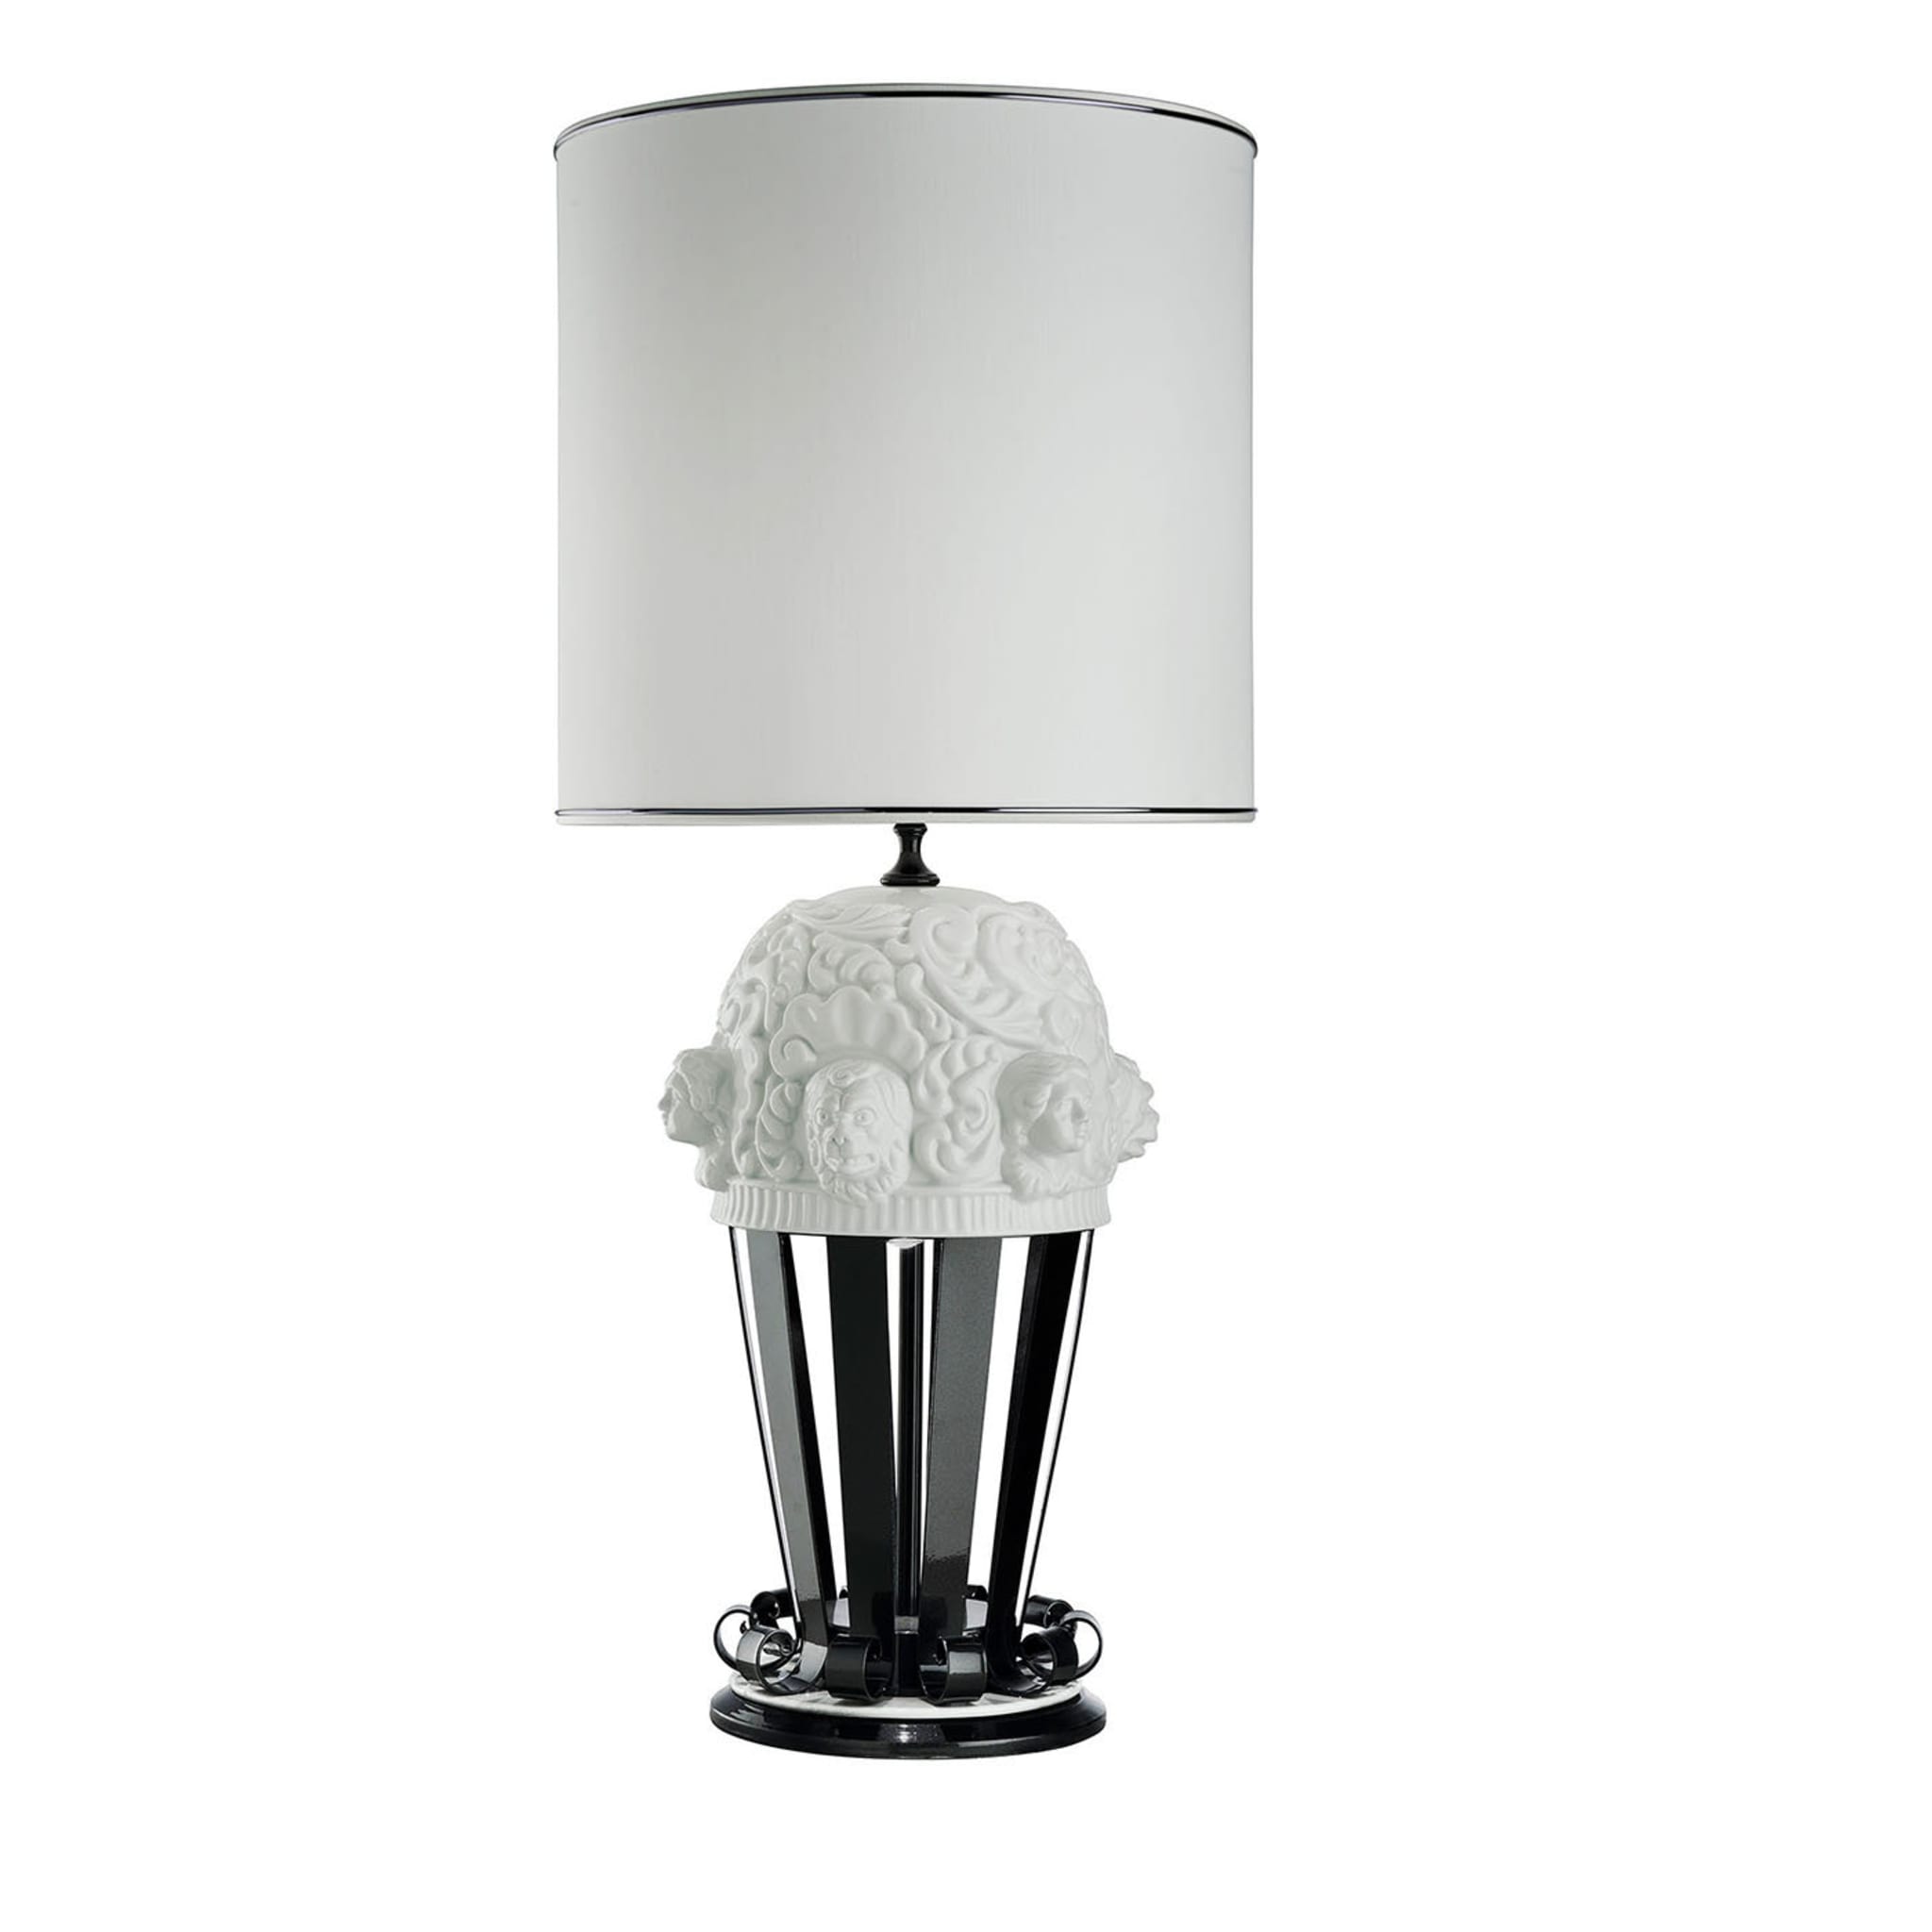 Principe Table Lamp by Salvatore Spataro and Paolo Barboni - Main view